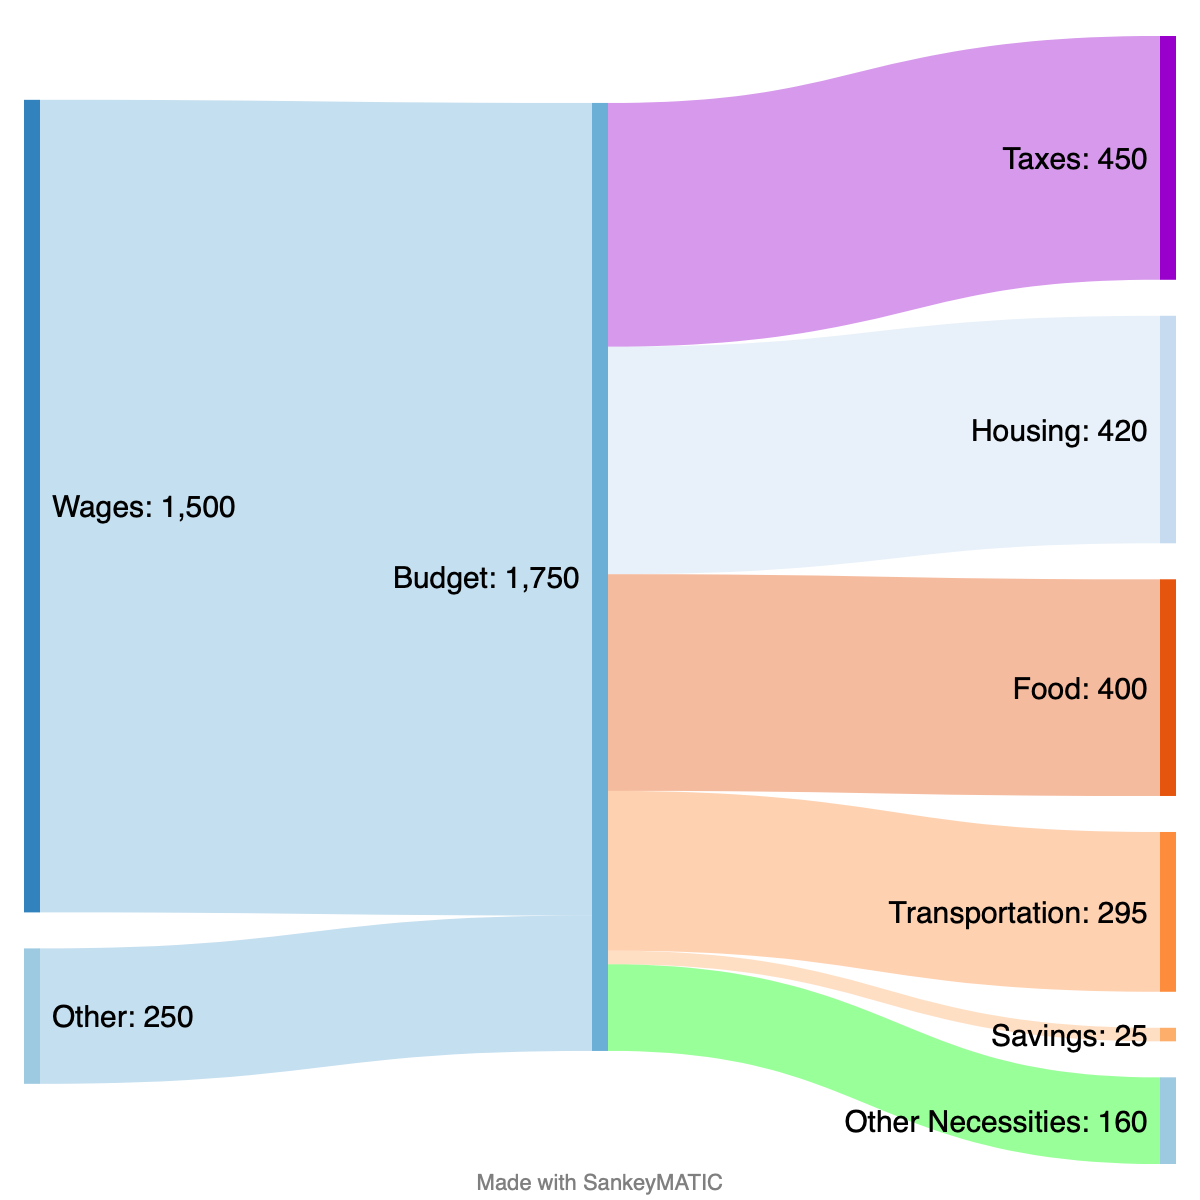 Thumbnail image of the sample Sankey diagram for a Basic Budget